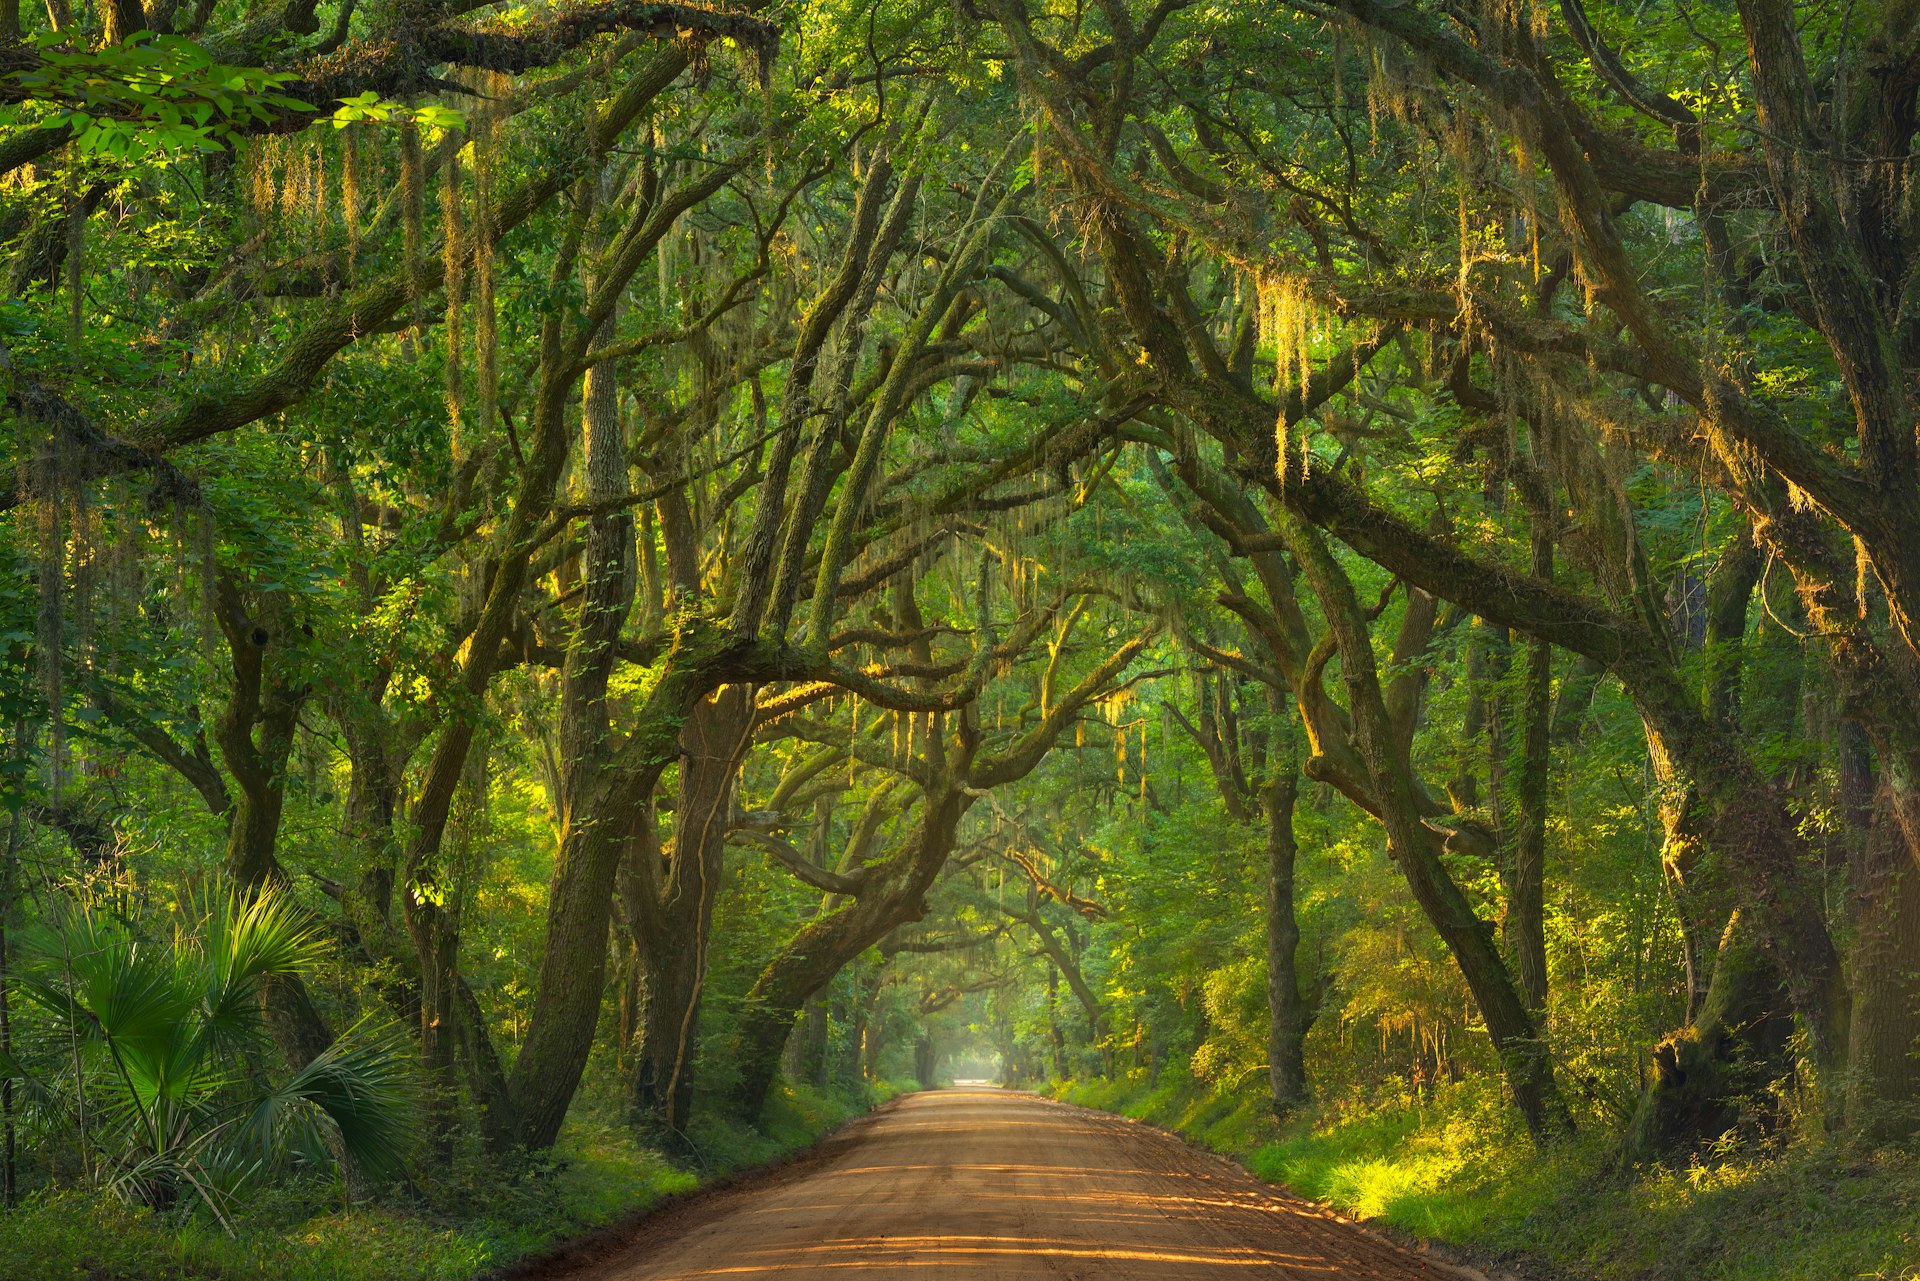 A road lined with trees that hang down on both sides and meet in the middle to form a green tunnel